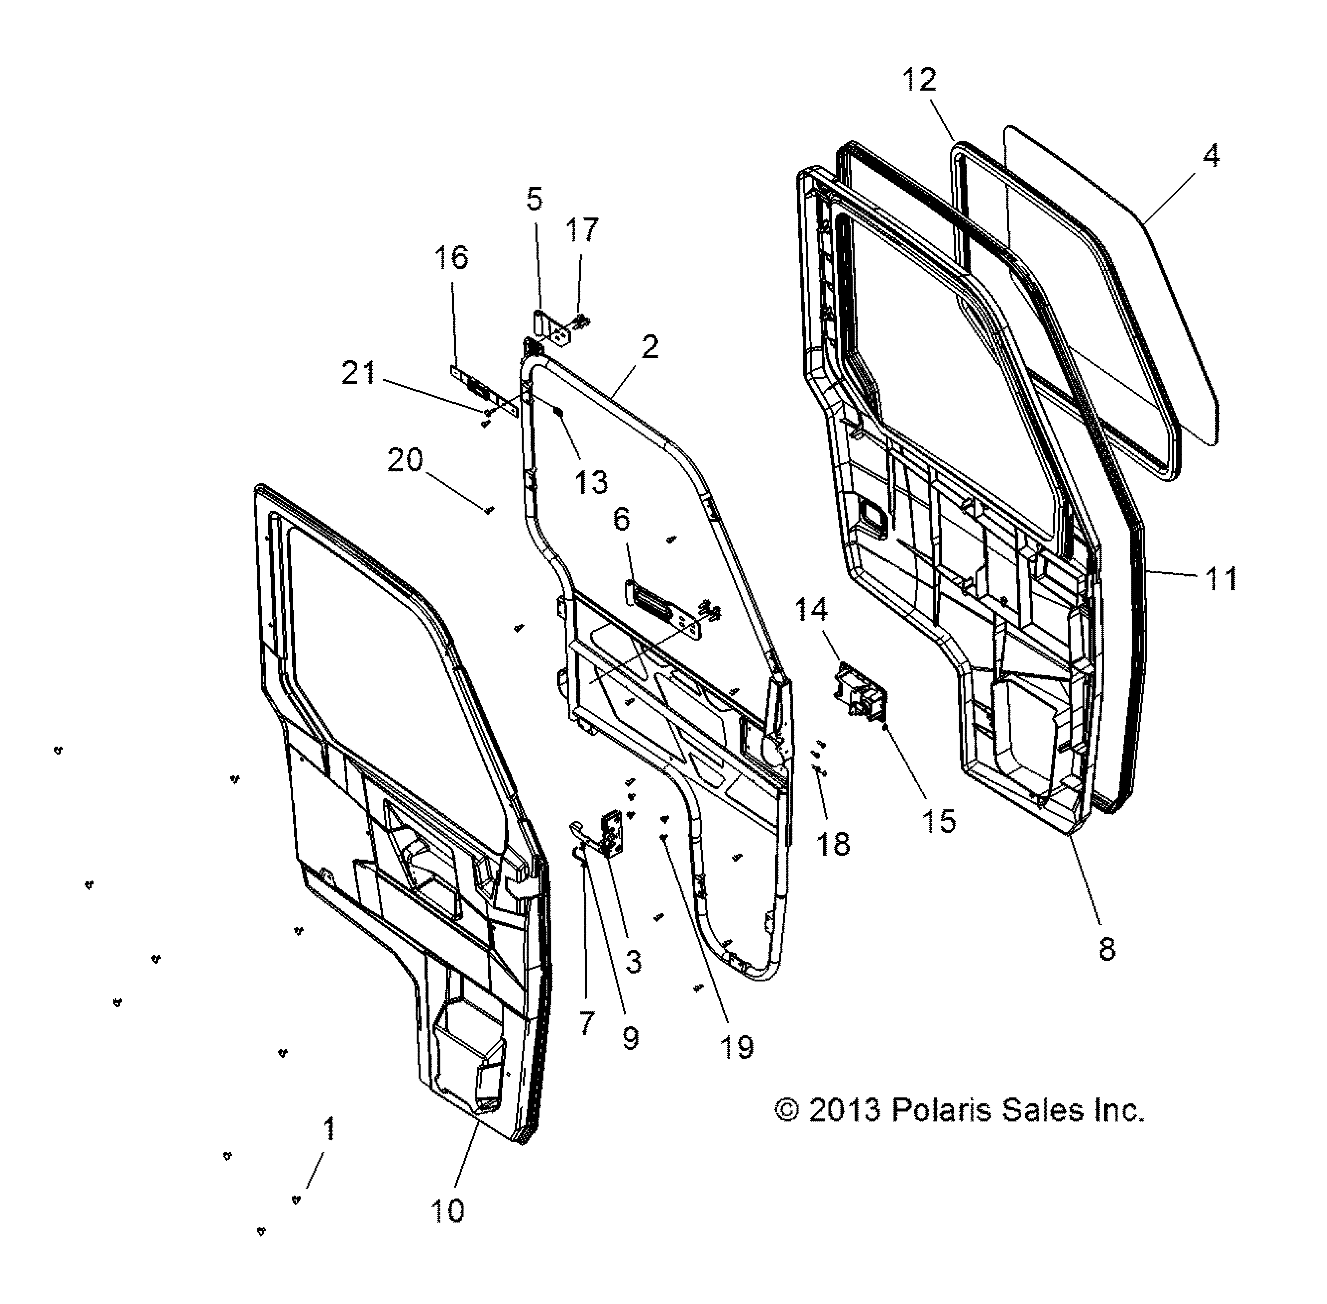 Part Number : 5521990 SEAL-GLASS WINDOW